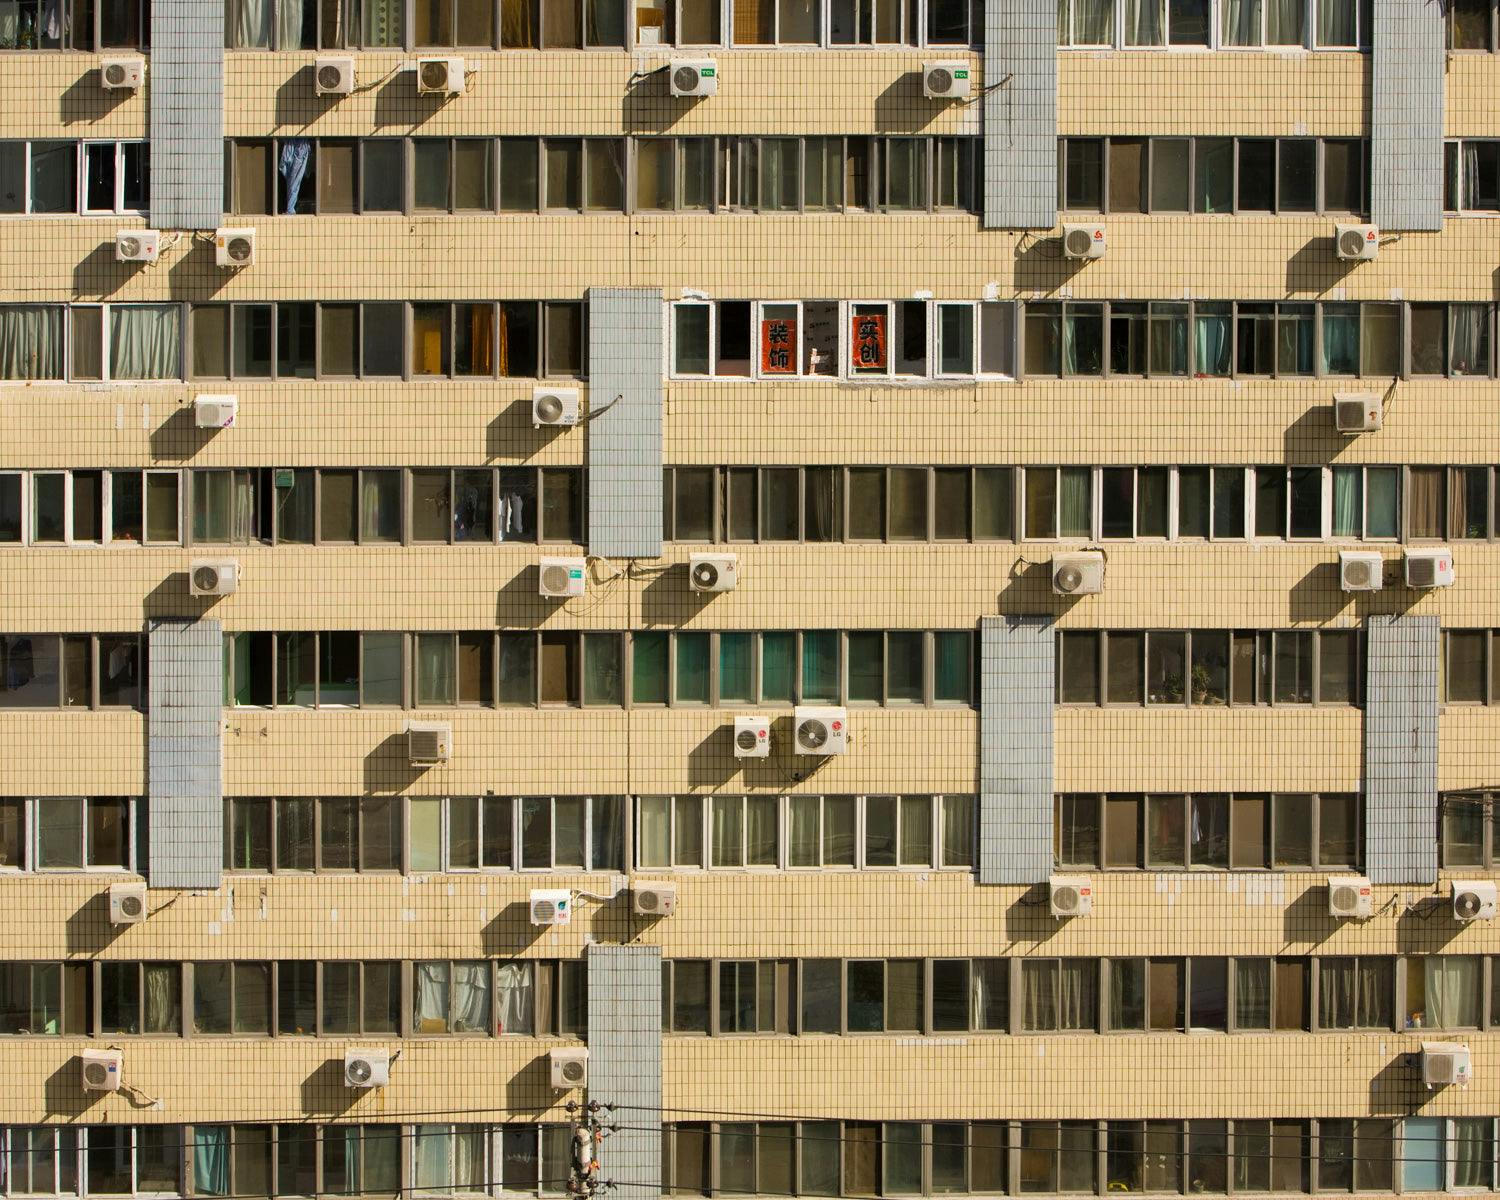 Photography by Ashok Sinha titled "Home #3, Beijing, China".